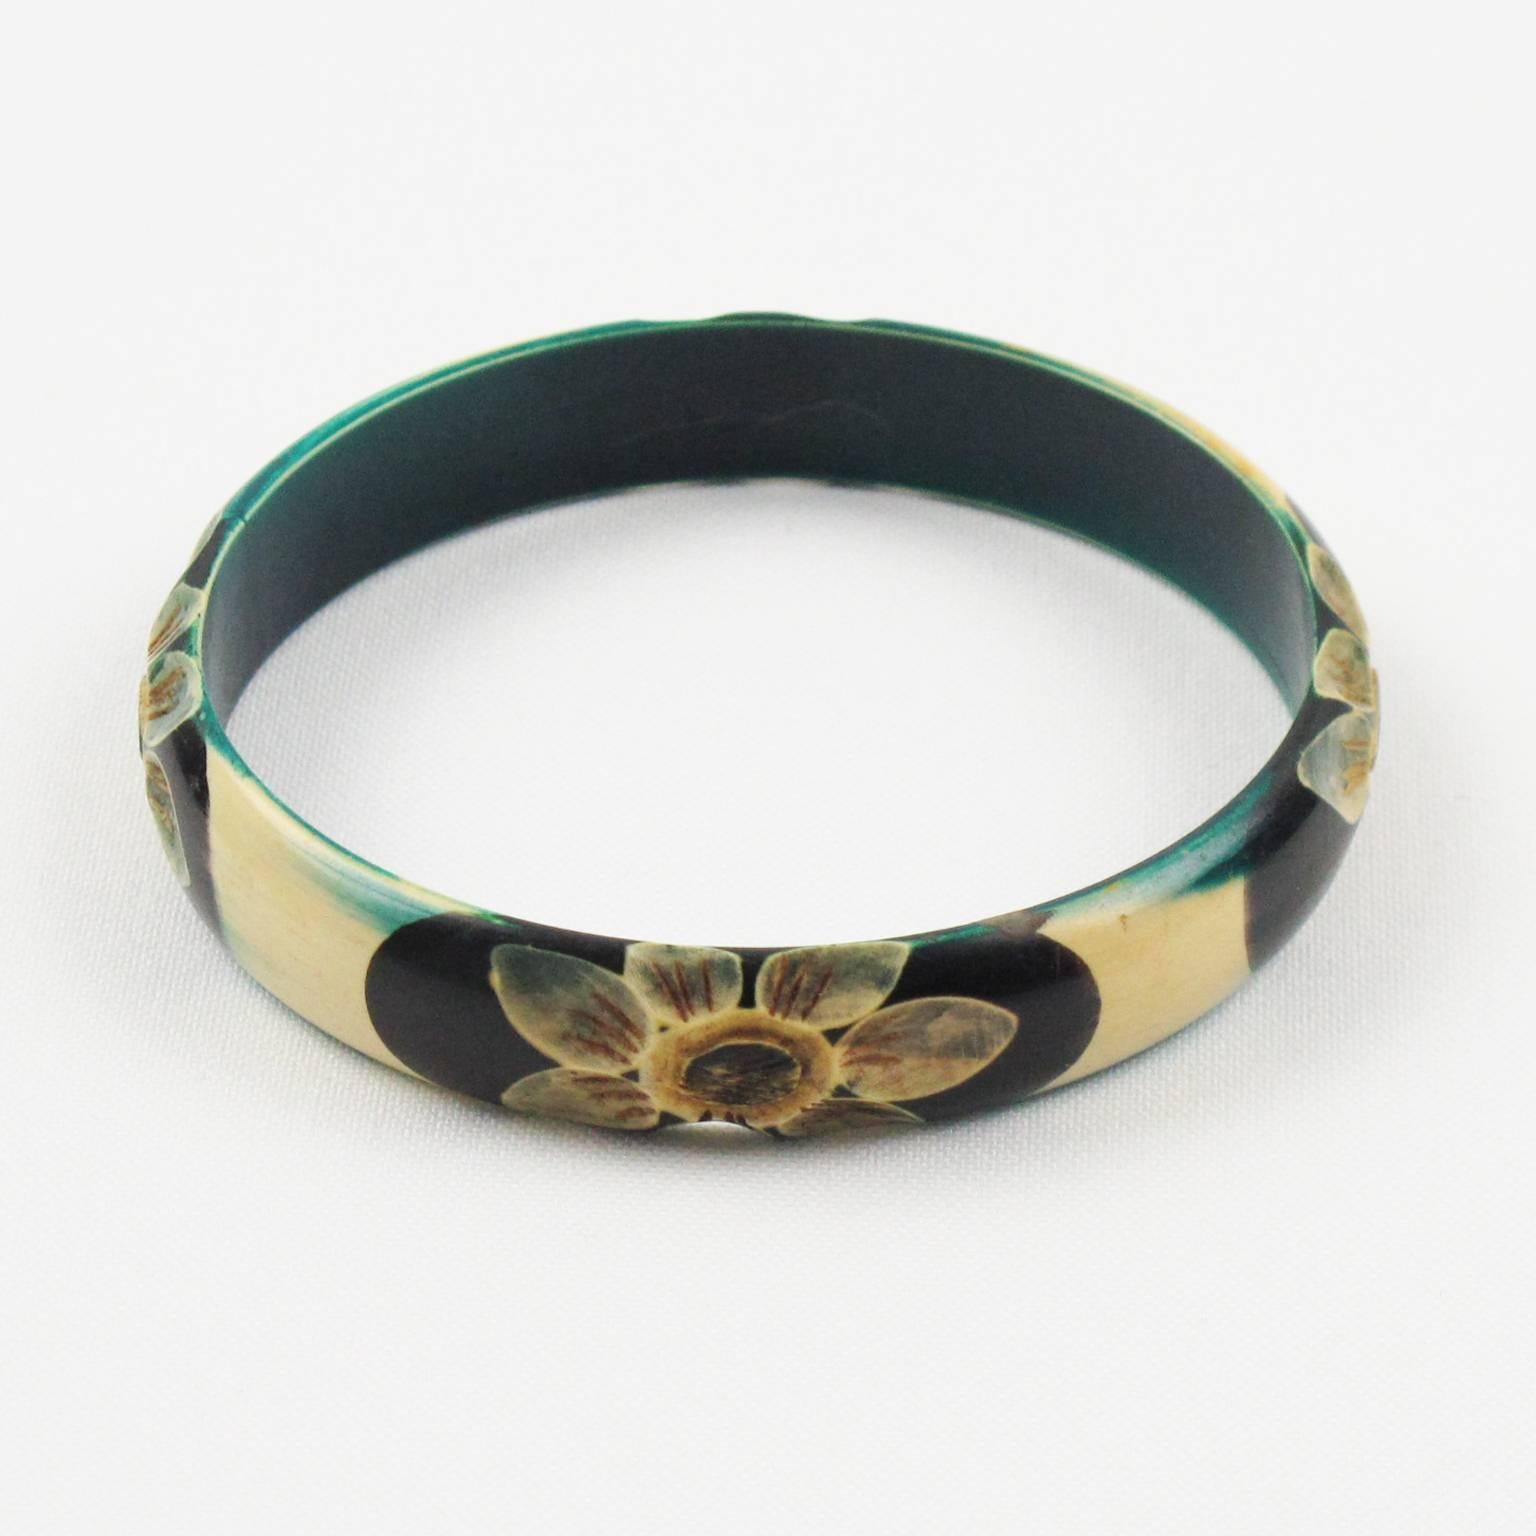 Lovely vintage Art Deco celluloid bracelet bangle. Featuring floral design, four motif all around the bracelet deeply carved, painted and stained. Assorted colors of teal, off-white, yellow and black. France, circa 1925s. Excellent vintage